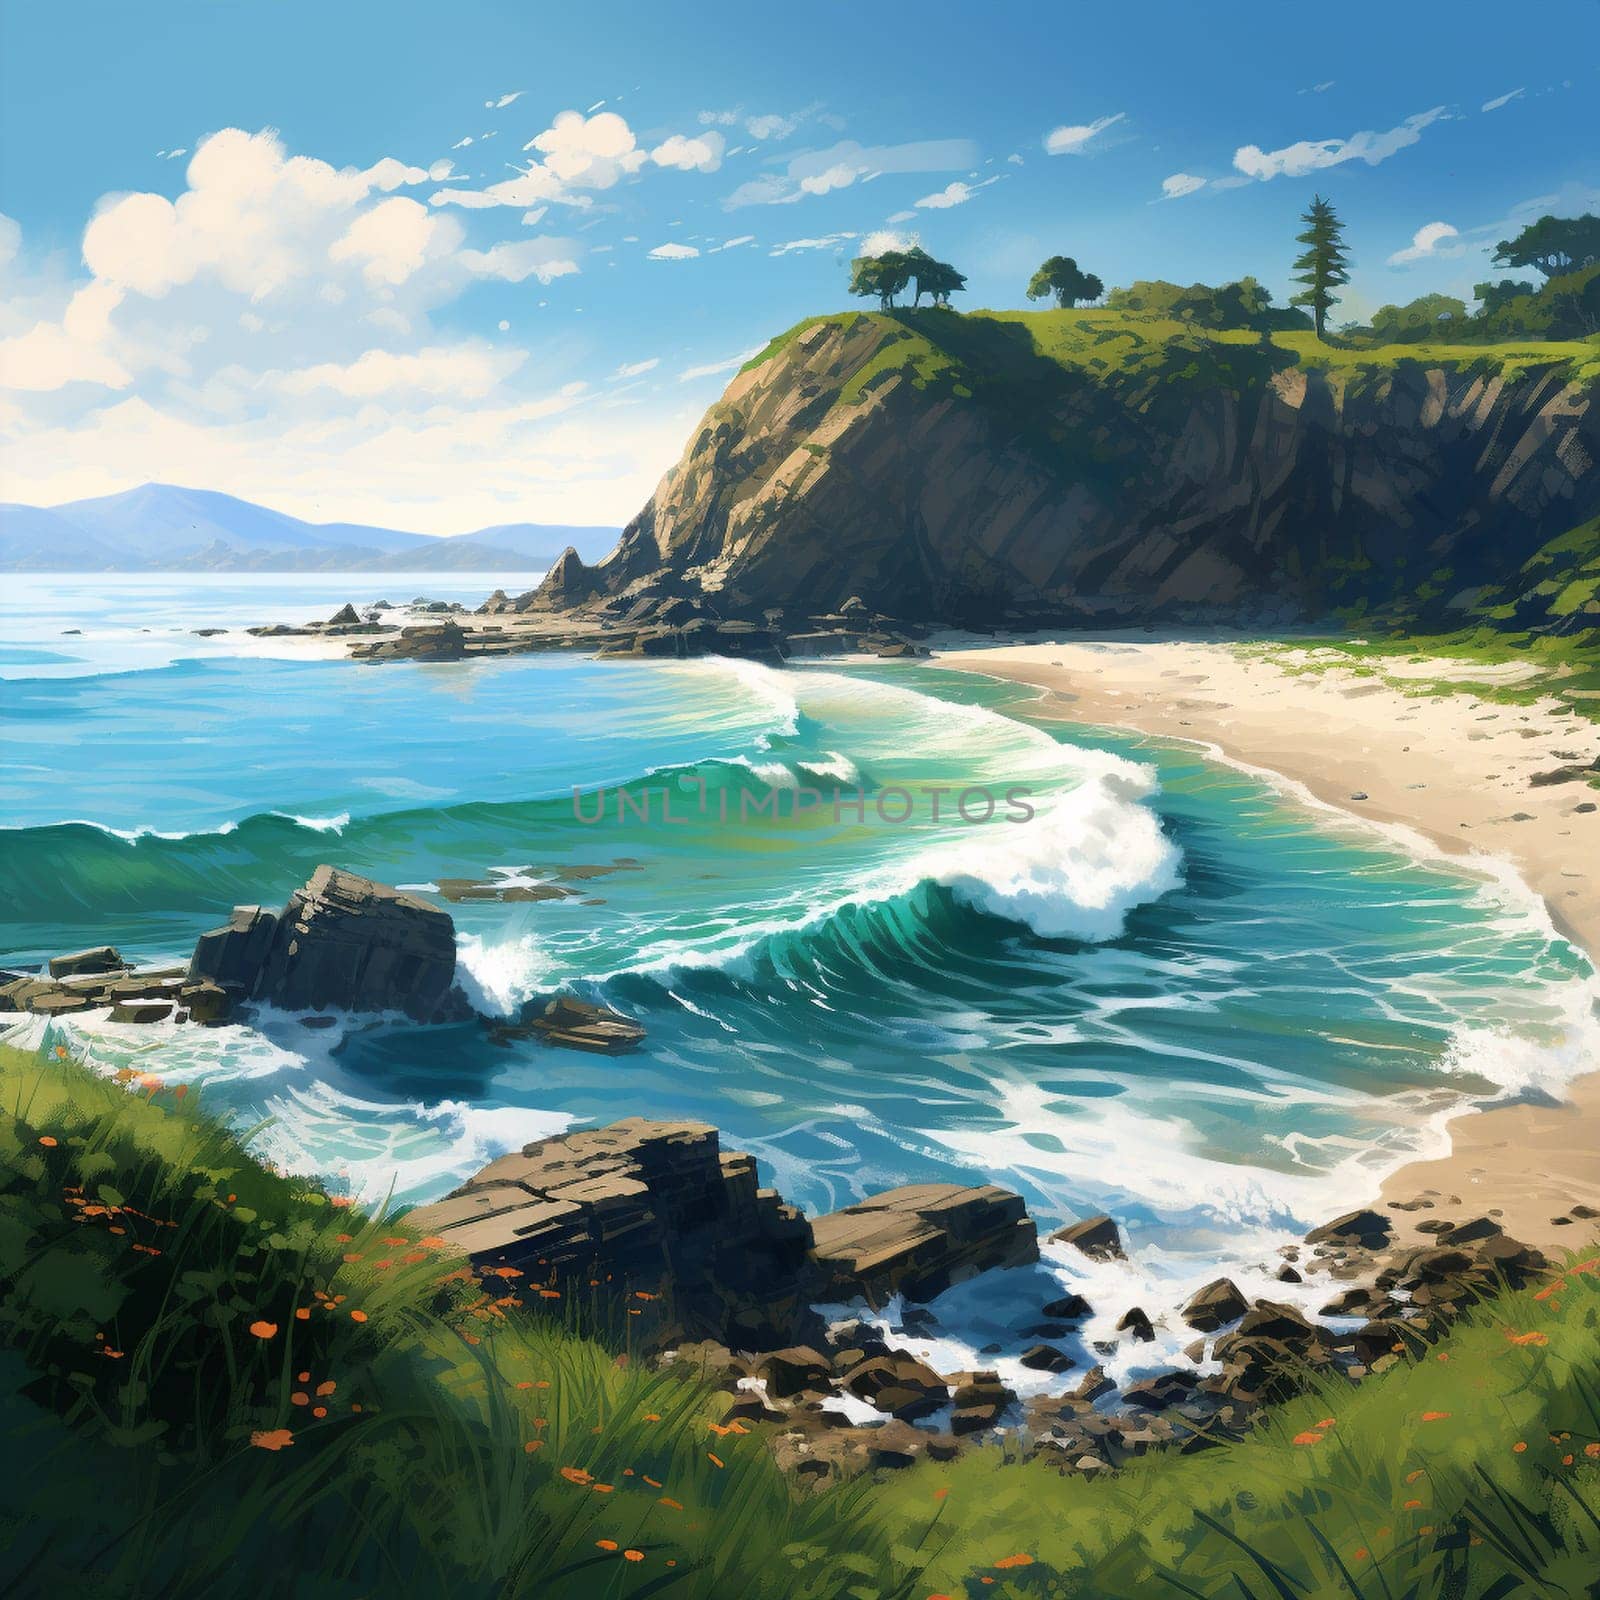 Experience the serene beauty of a peaceful coastline merging harmoniously with the ocean in this vibrant yet realistic artwork. The artwork captures the essence of tranquility as the waves gently caress the shore, creating a sense of peace and harmony between land and sea.